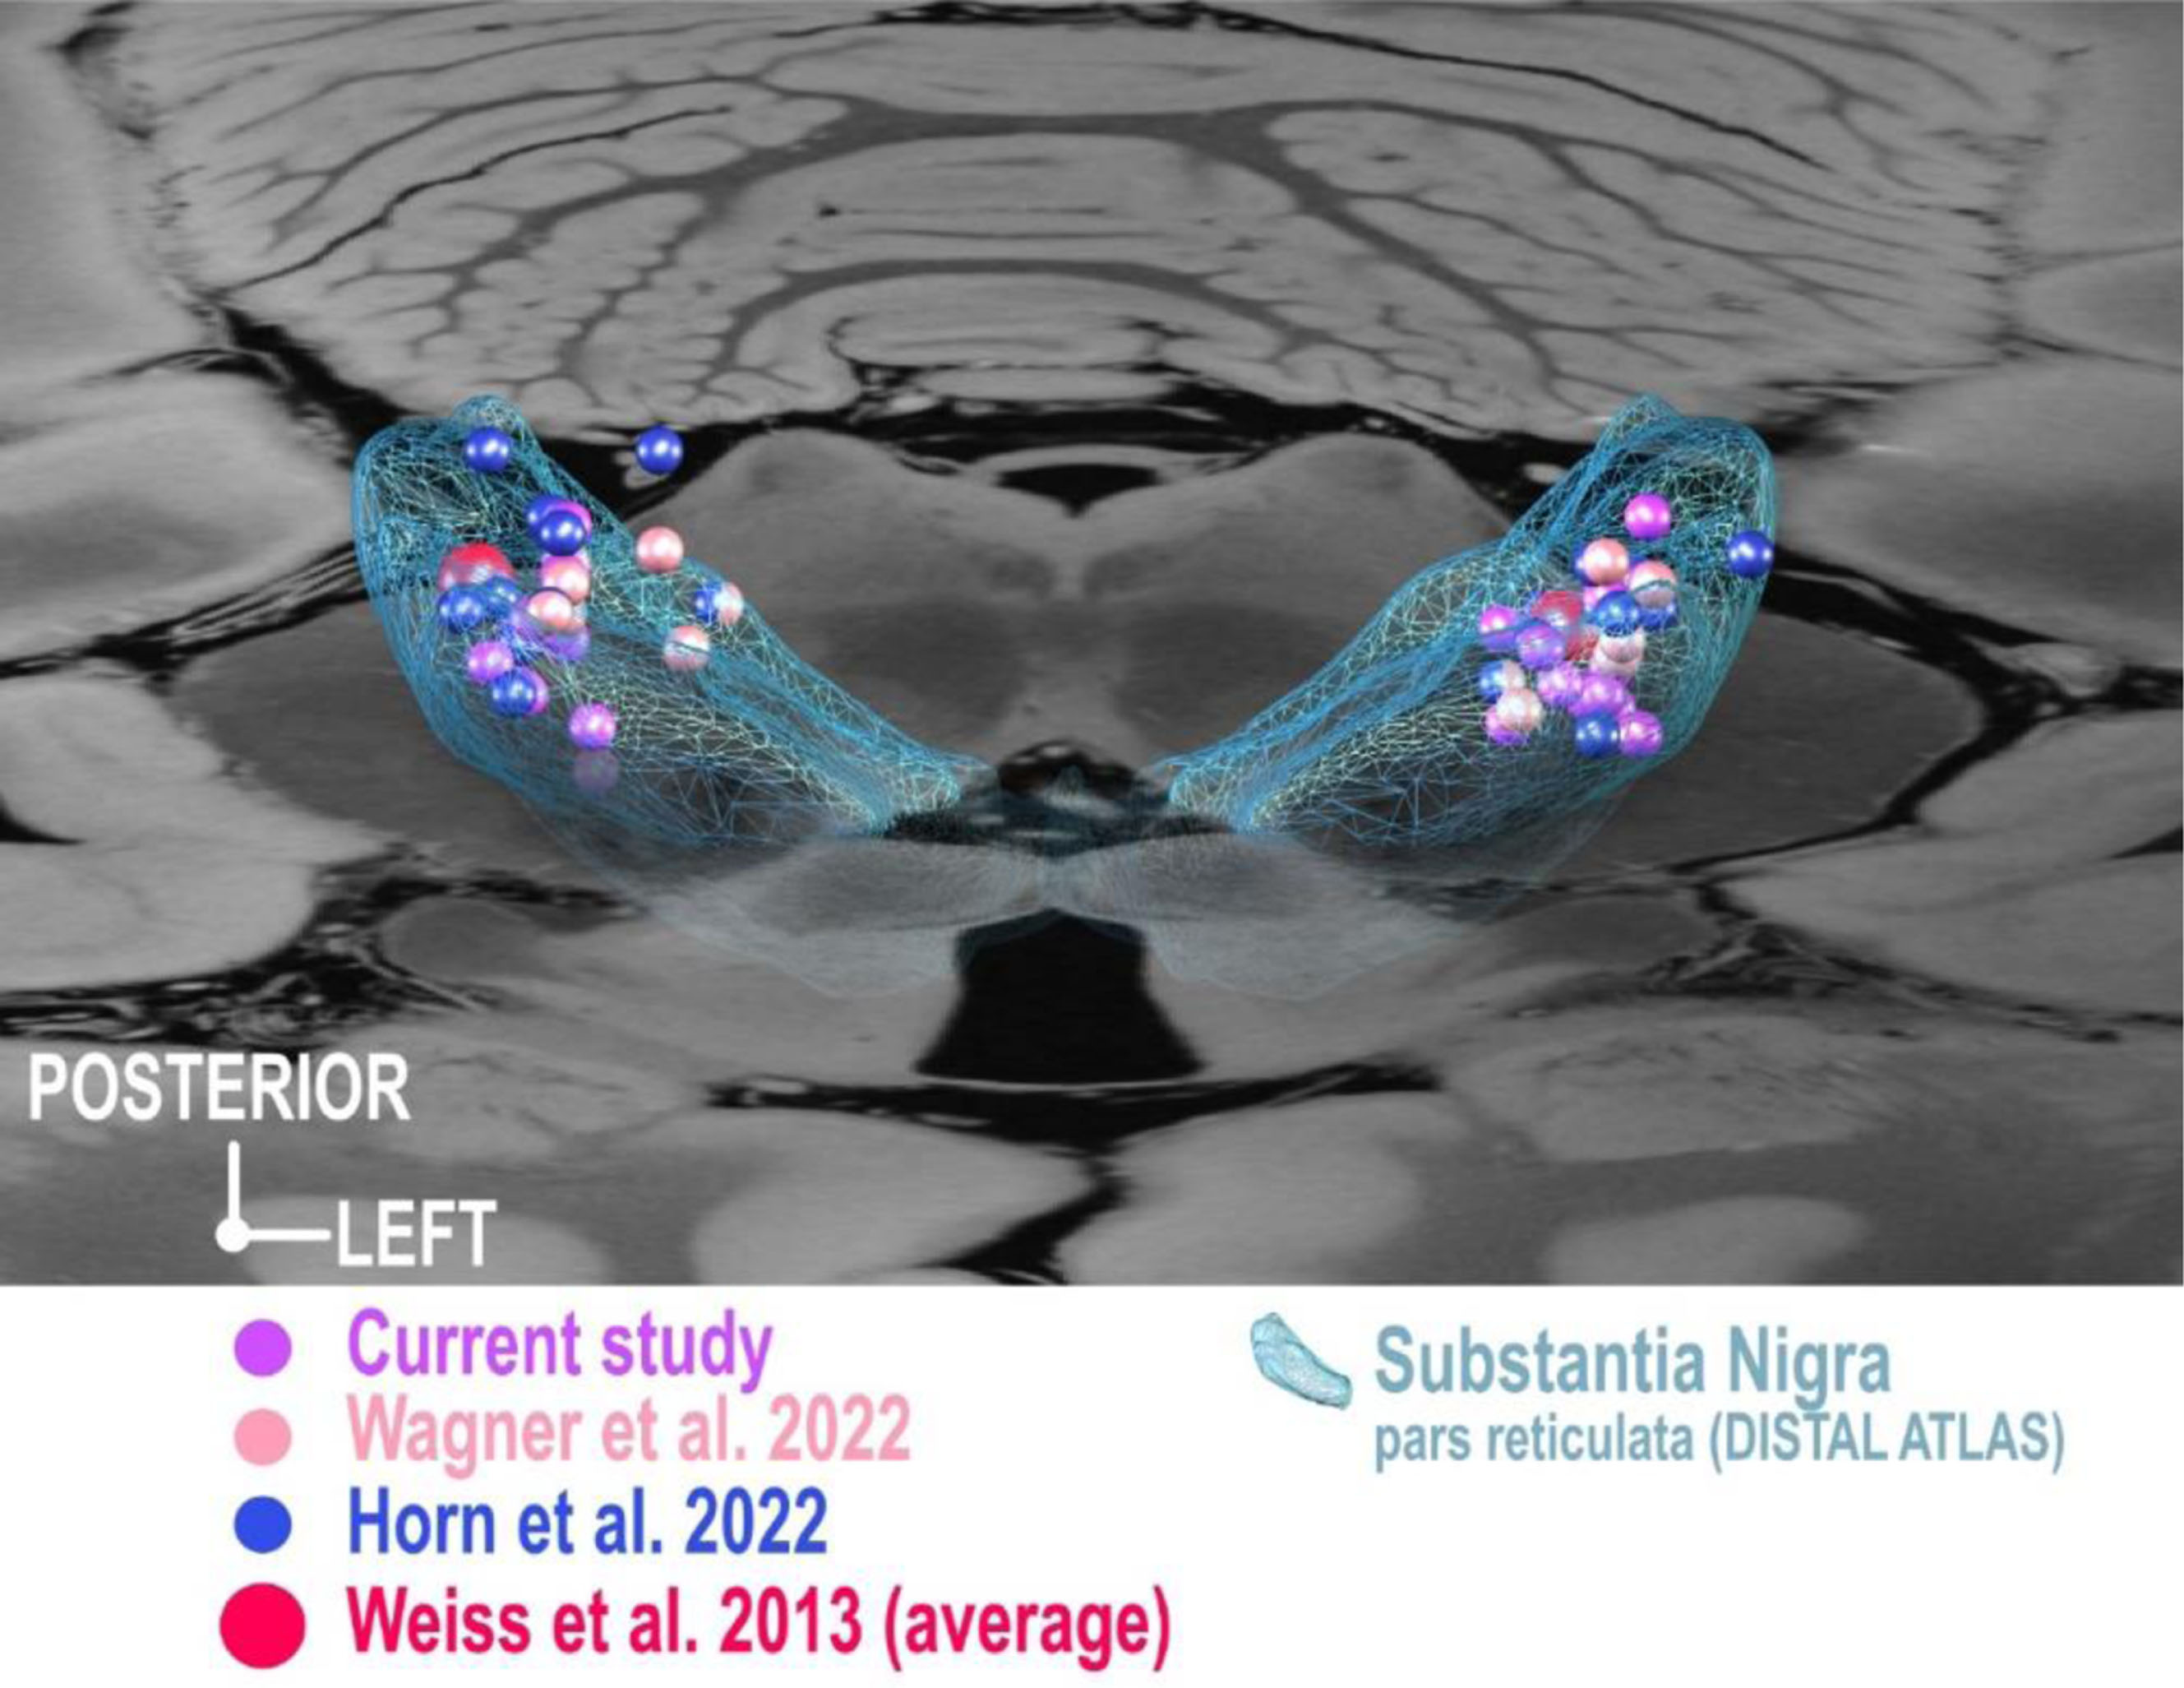 3D-visualization of previously published coordinates of electrodes targeting the substantia nigra from two studies [15, 17] as well as the cohort average of one study [18]. As coordinates for these studies were reported relative to AC-PC, an established conversion algorithm [62] was used to project coordinates into a common space (MNI) and relative to the substantia nigra atlas structure as defined by the DISTAL atlas [32] superimposed on a slice of 7 Tesla MRI of ex vivo human brain at 200 micron resolution [61]. Note that coordinates aggregate in the dorsolateral substantia nigra or even dorsal to the substantia nigra within the region of the subthalamic nucleus.